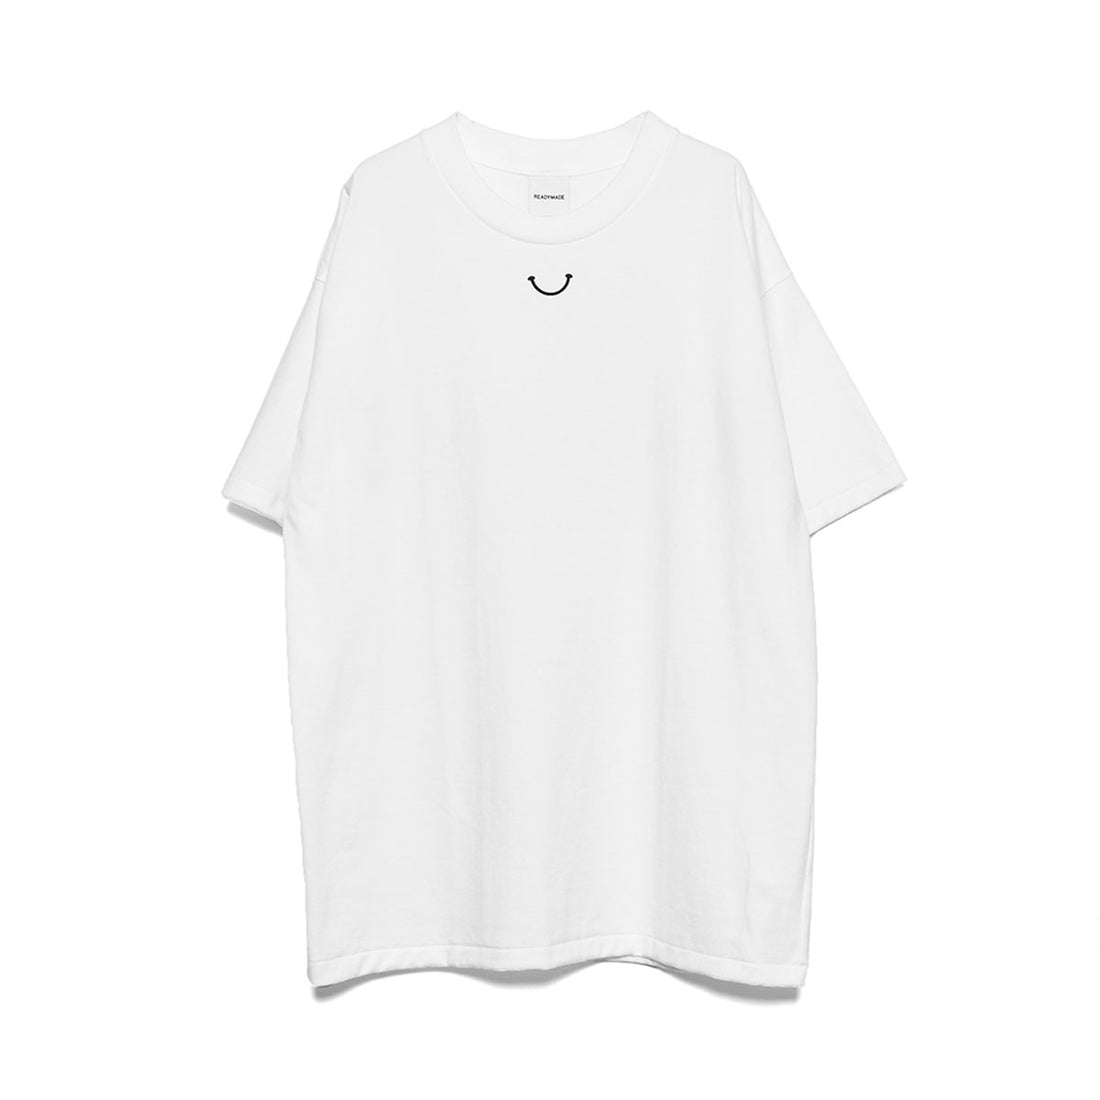 [READYMADE]SS T-SHIRT SMILE/WHITE(RE-CO-WH-00-00-244)